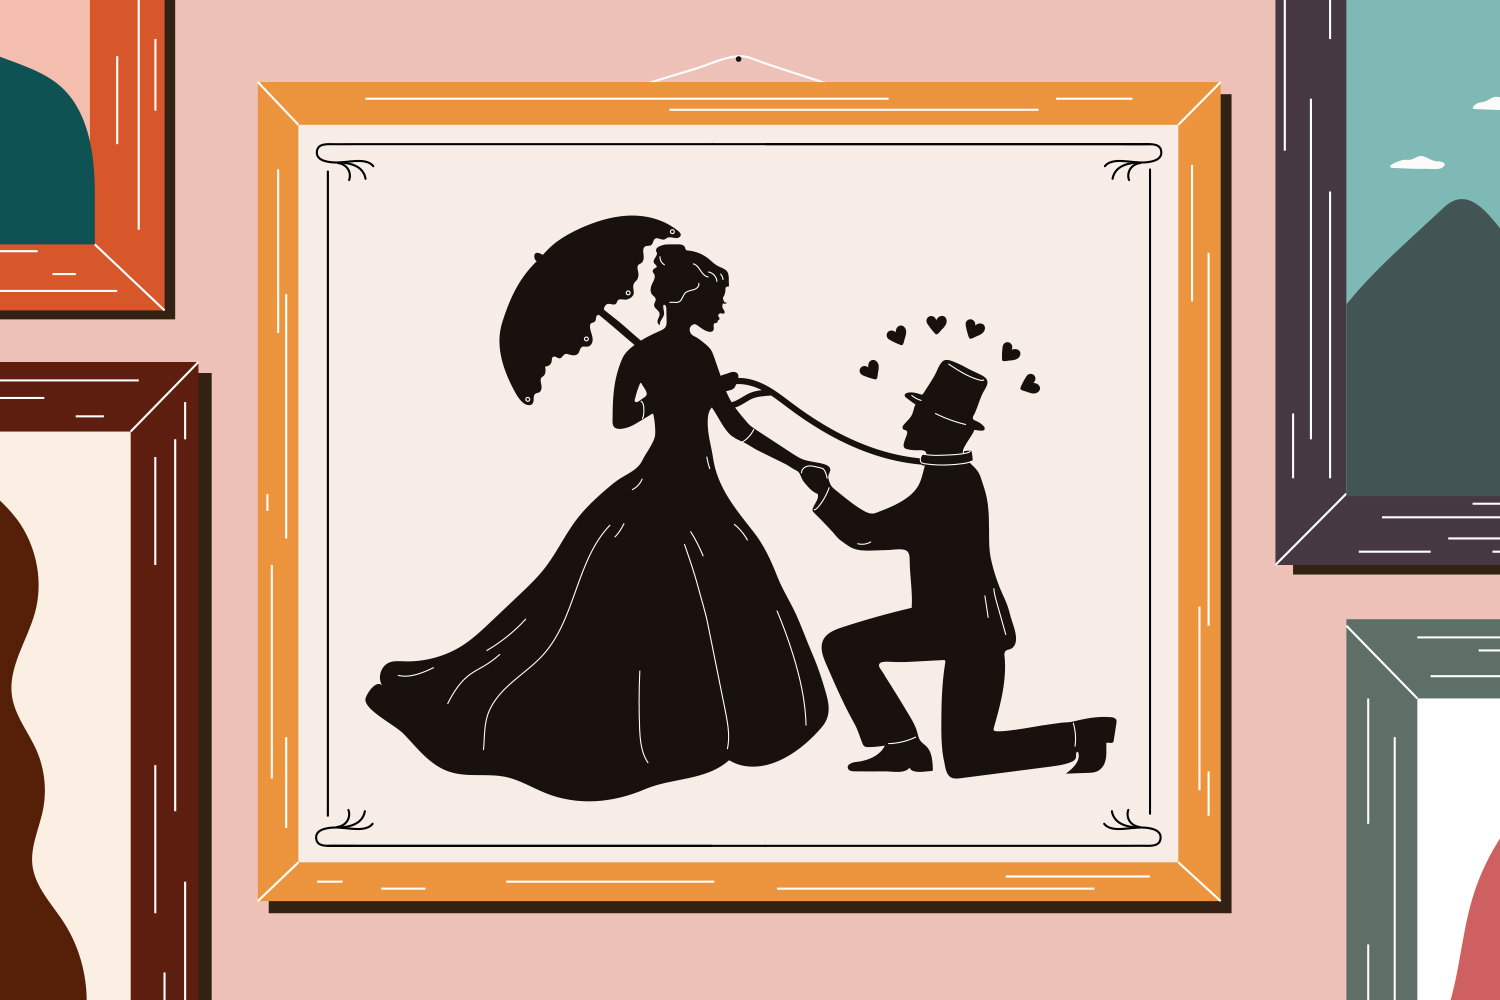 Illustration shows a wall of portraits, featuring a silhouette of a couple in Victorian dress. The man is on his knees and the woman holds a leash around his neck.